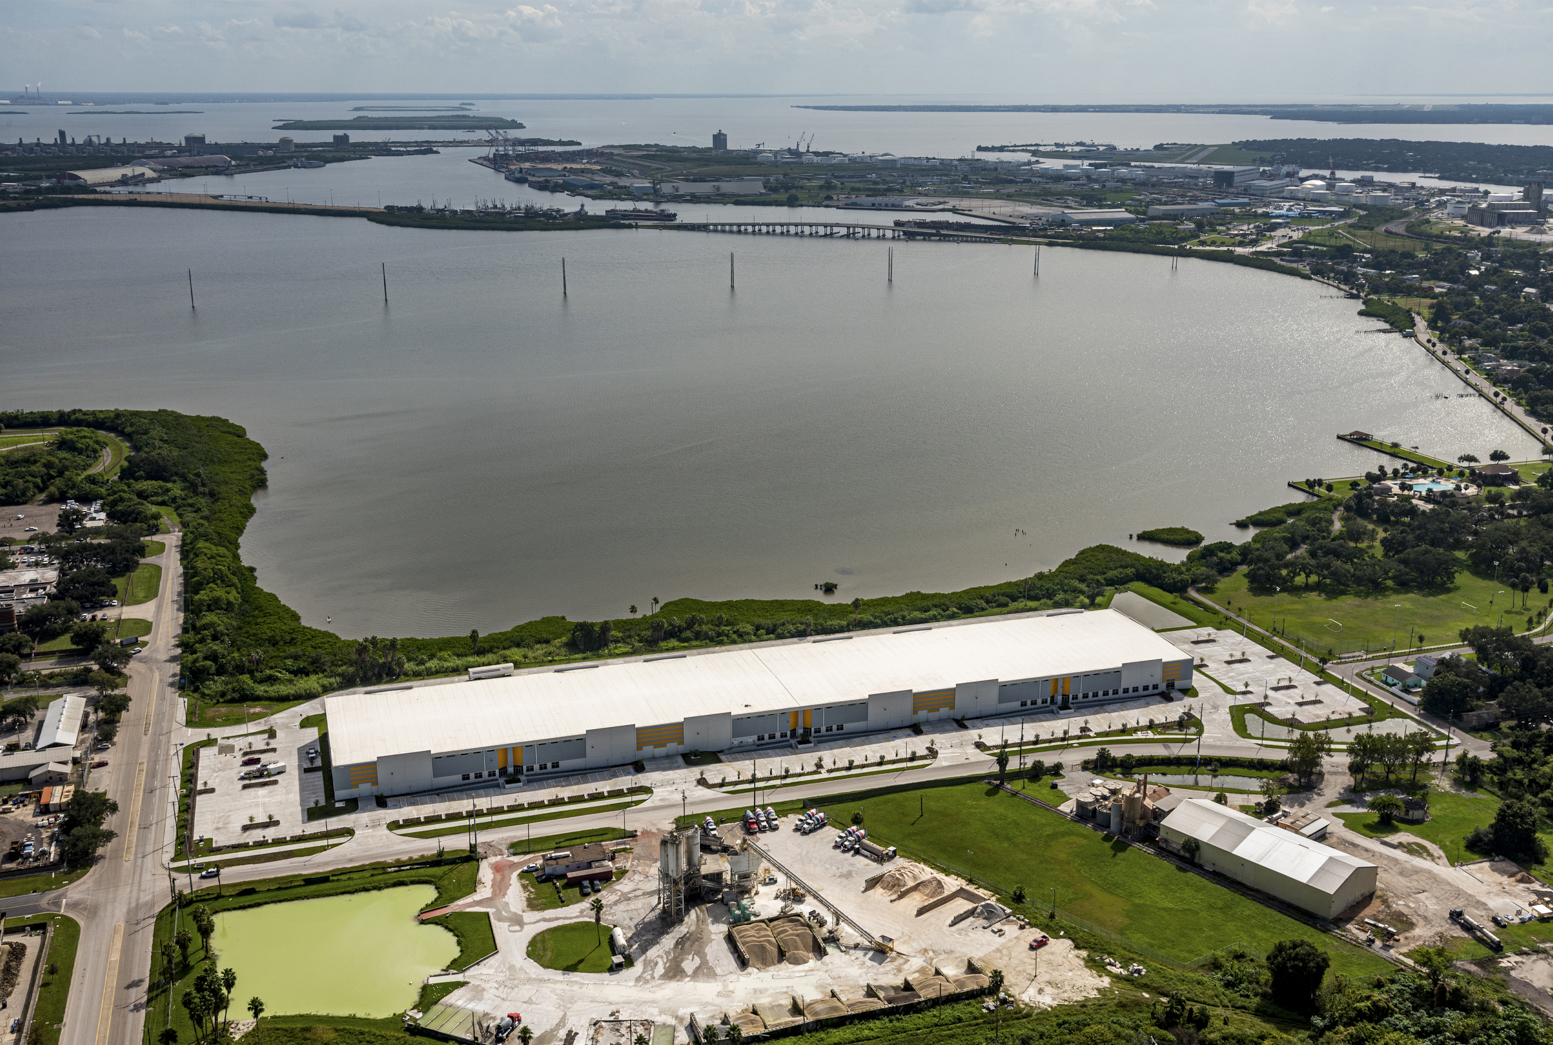 Tamp Fulfillment Center next to Tampa Bay.